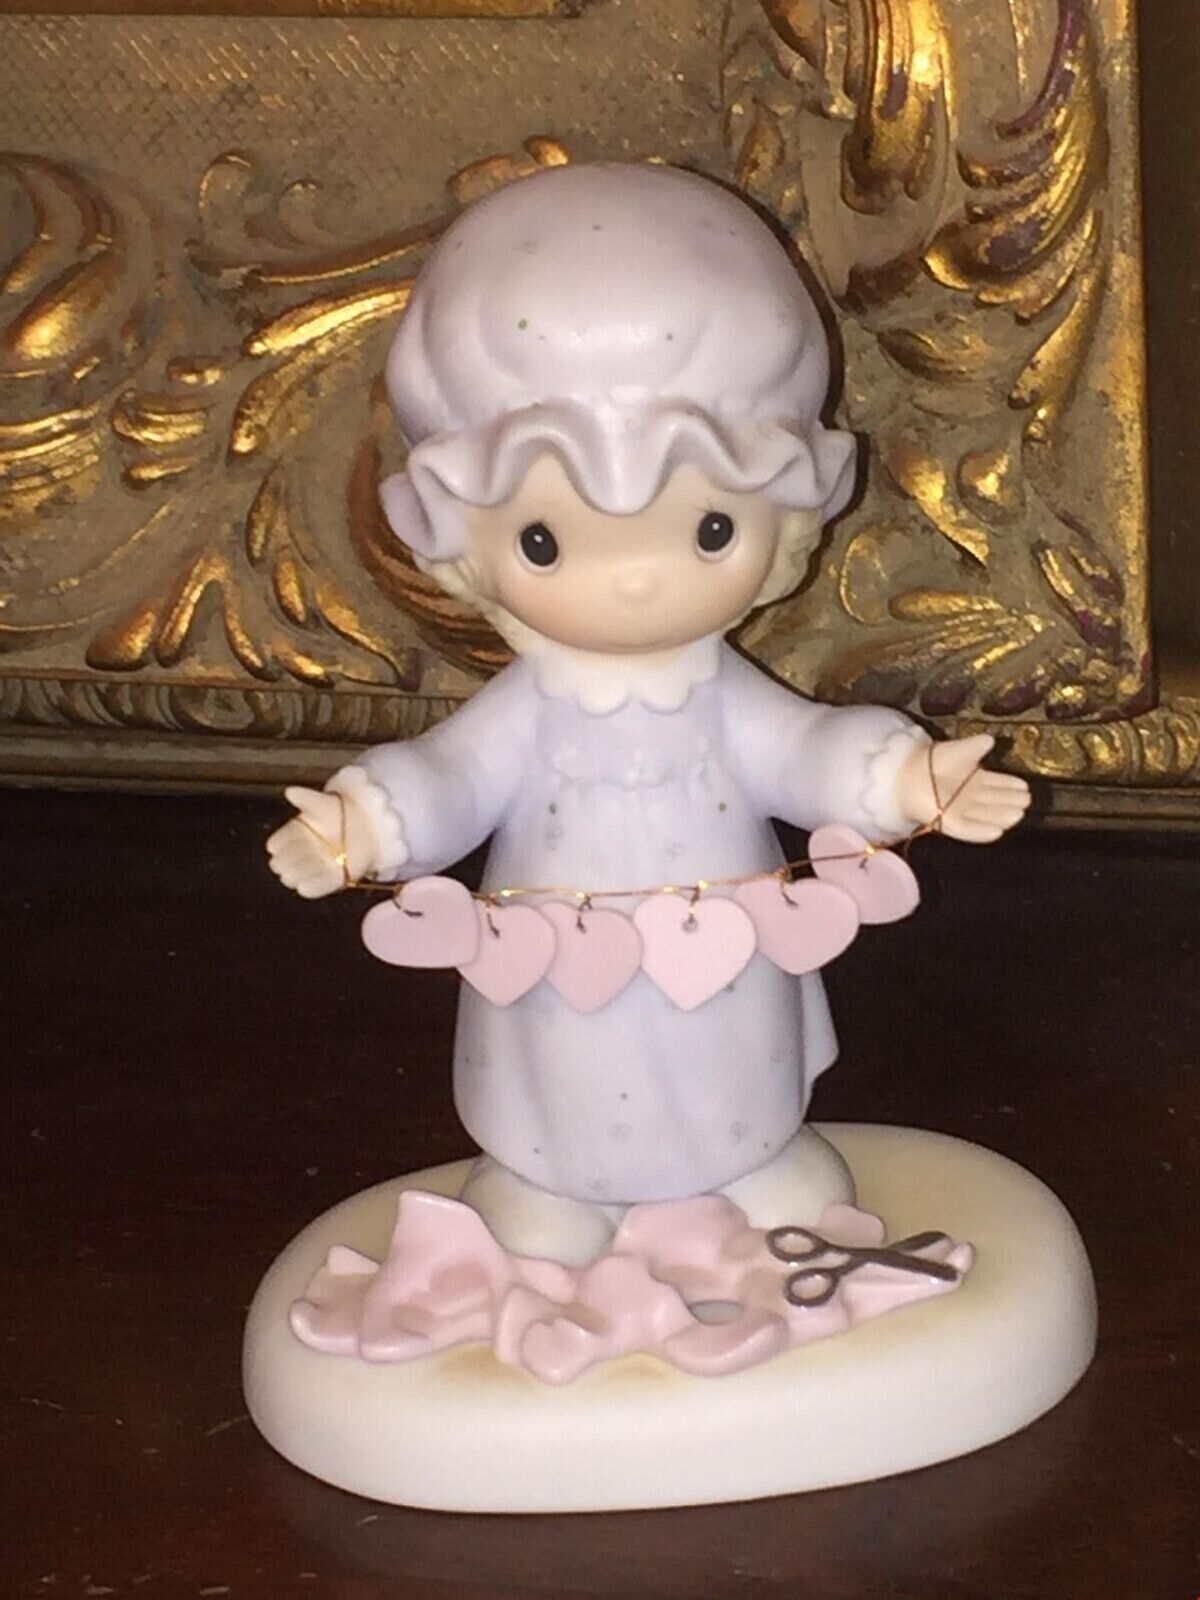 Precious Moments Figurine "You Have Touched So Many Hearts"  Enesco E-2821-1983